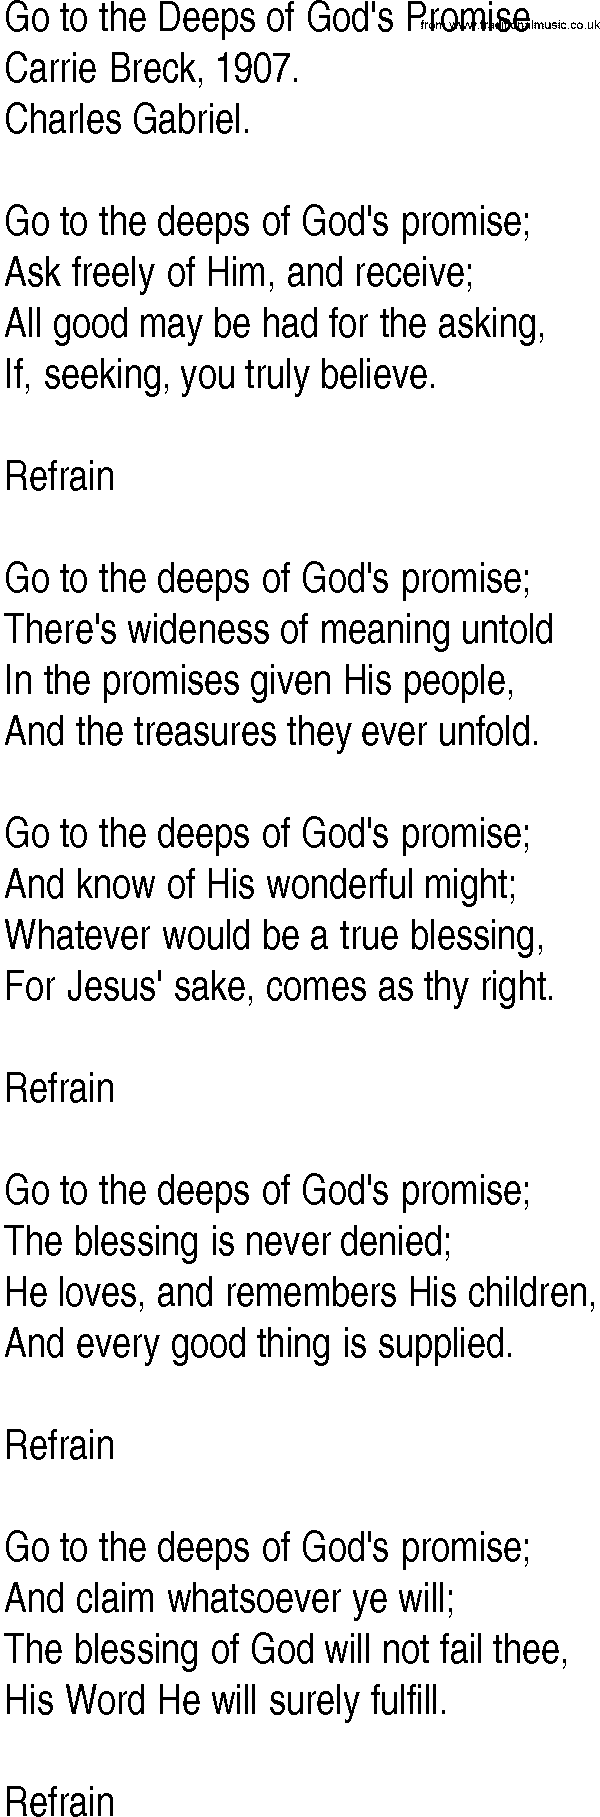 Hymn and Gospel Song: Go to the Deeps of God's Promise by Carrie Breck lyrics